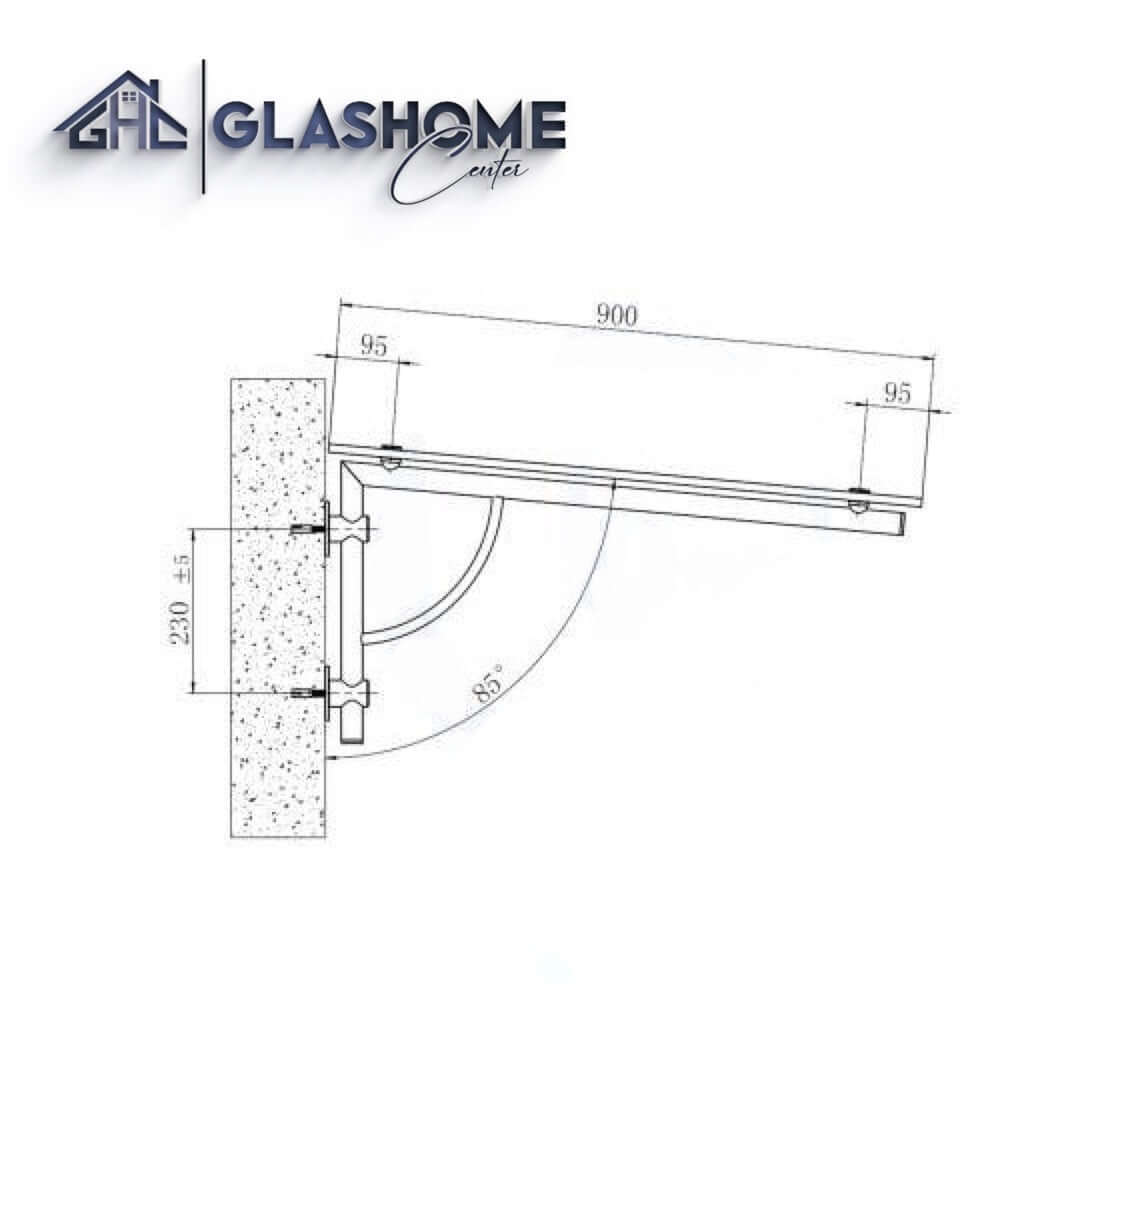 GlasHomeCenter - glass canopy - gray glass - 150x90cm - 13.1mm laminated safety glass - incl. 2 stainless steel brackets variant "Athen"